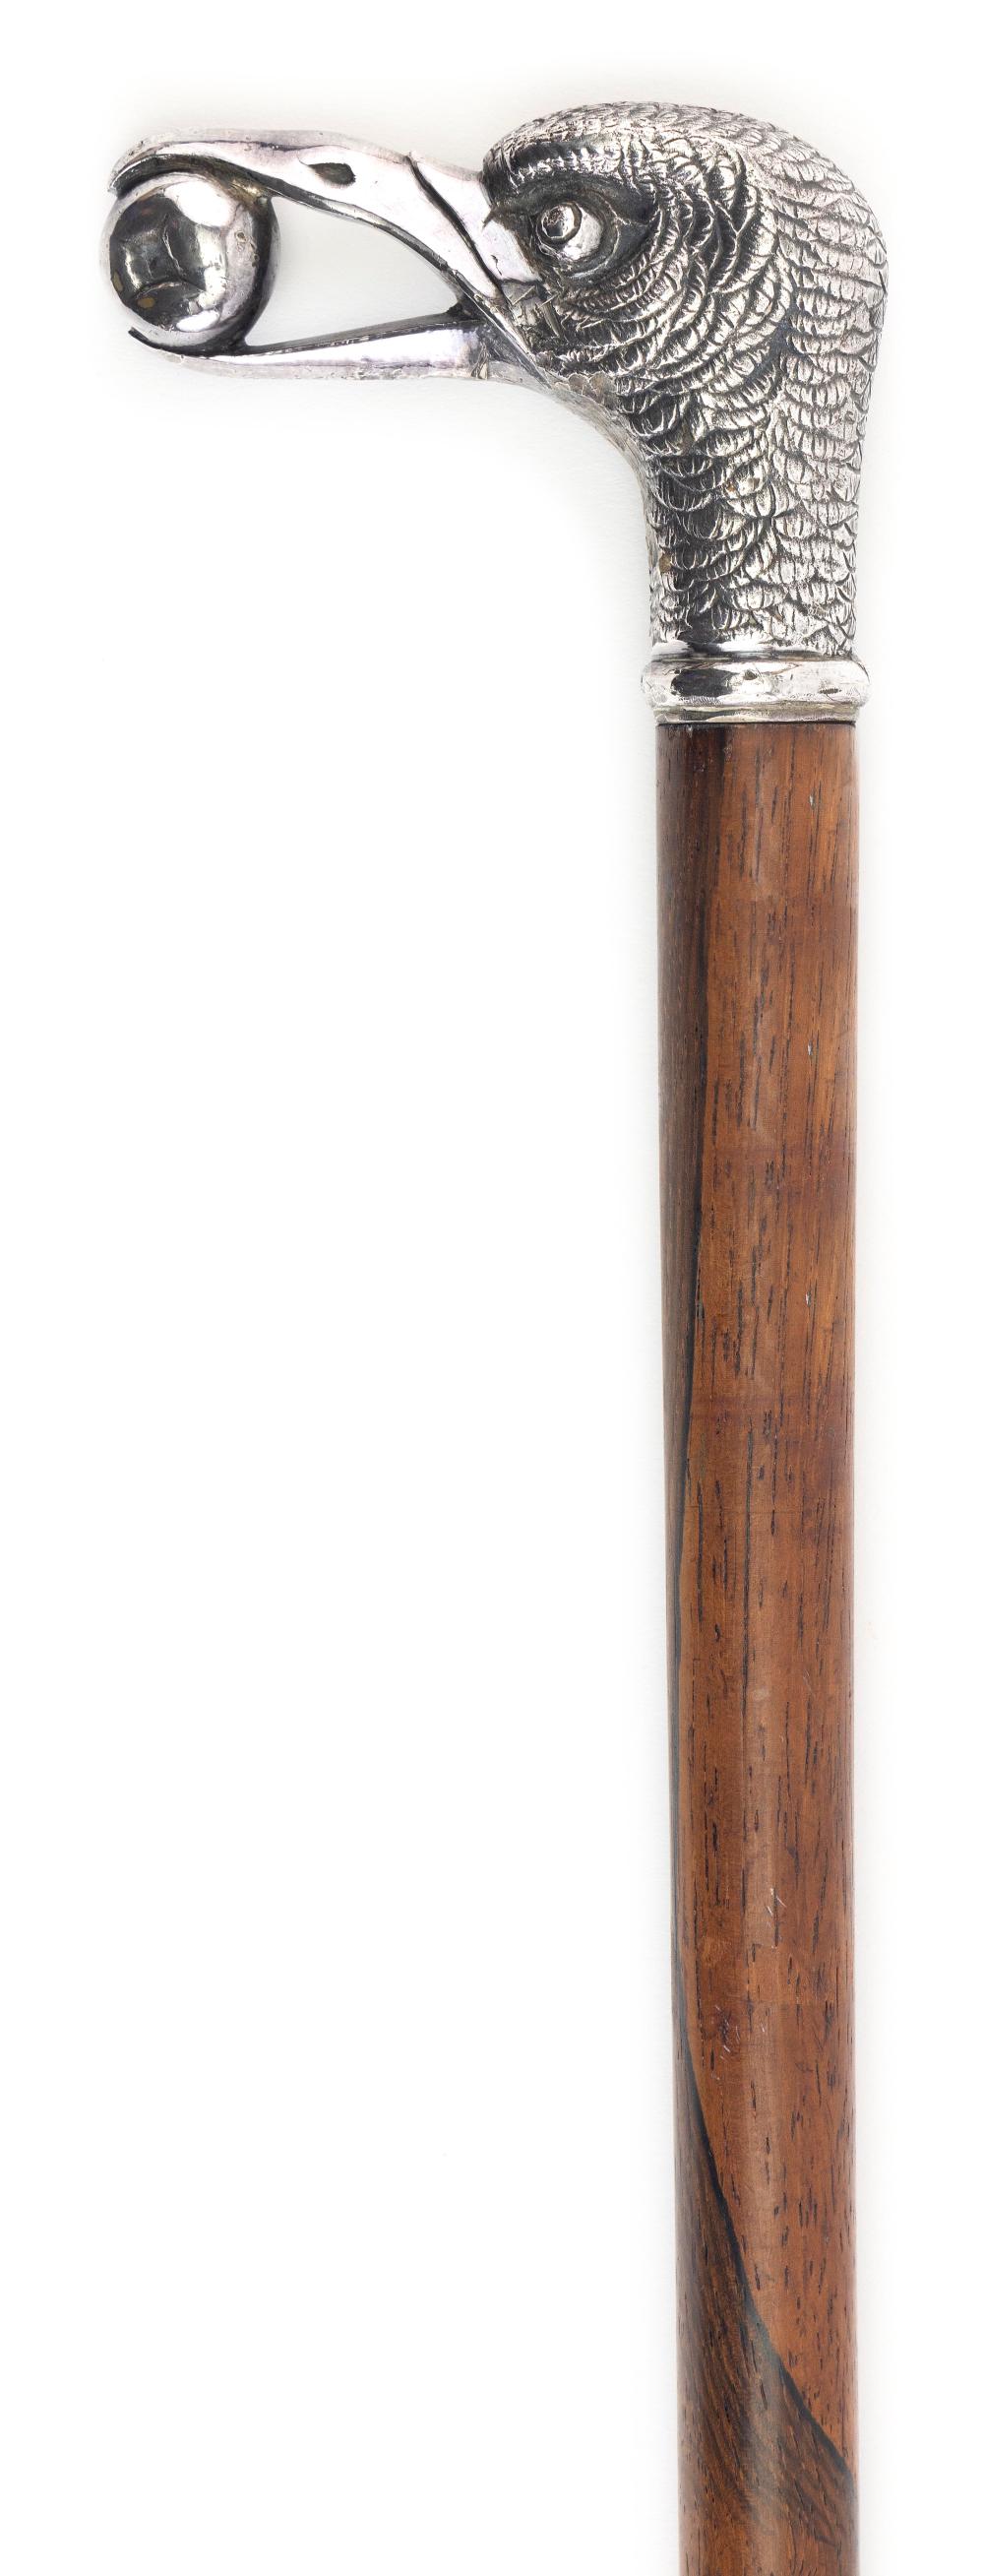 CANE WITH BIRD'S HEAD HANDLE LATE